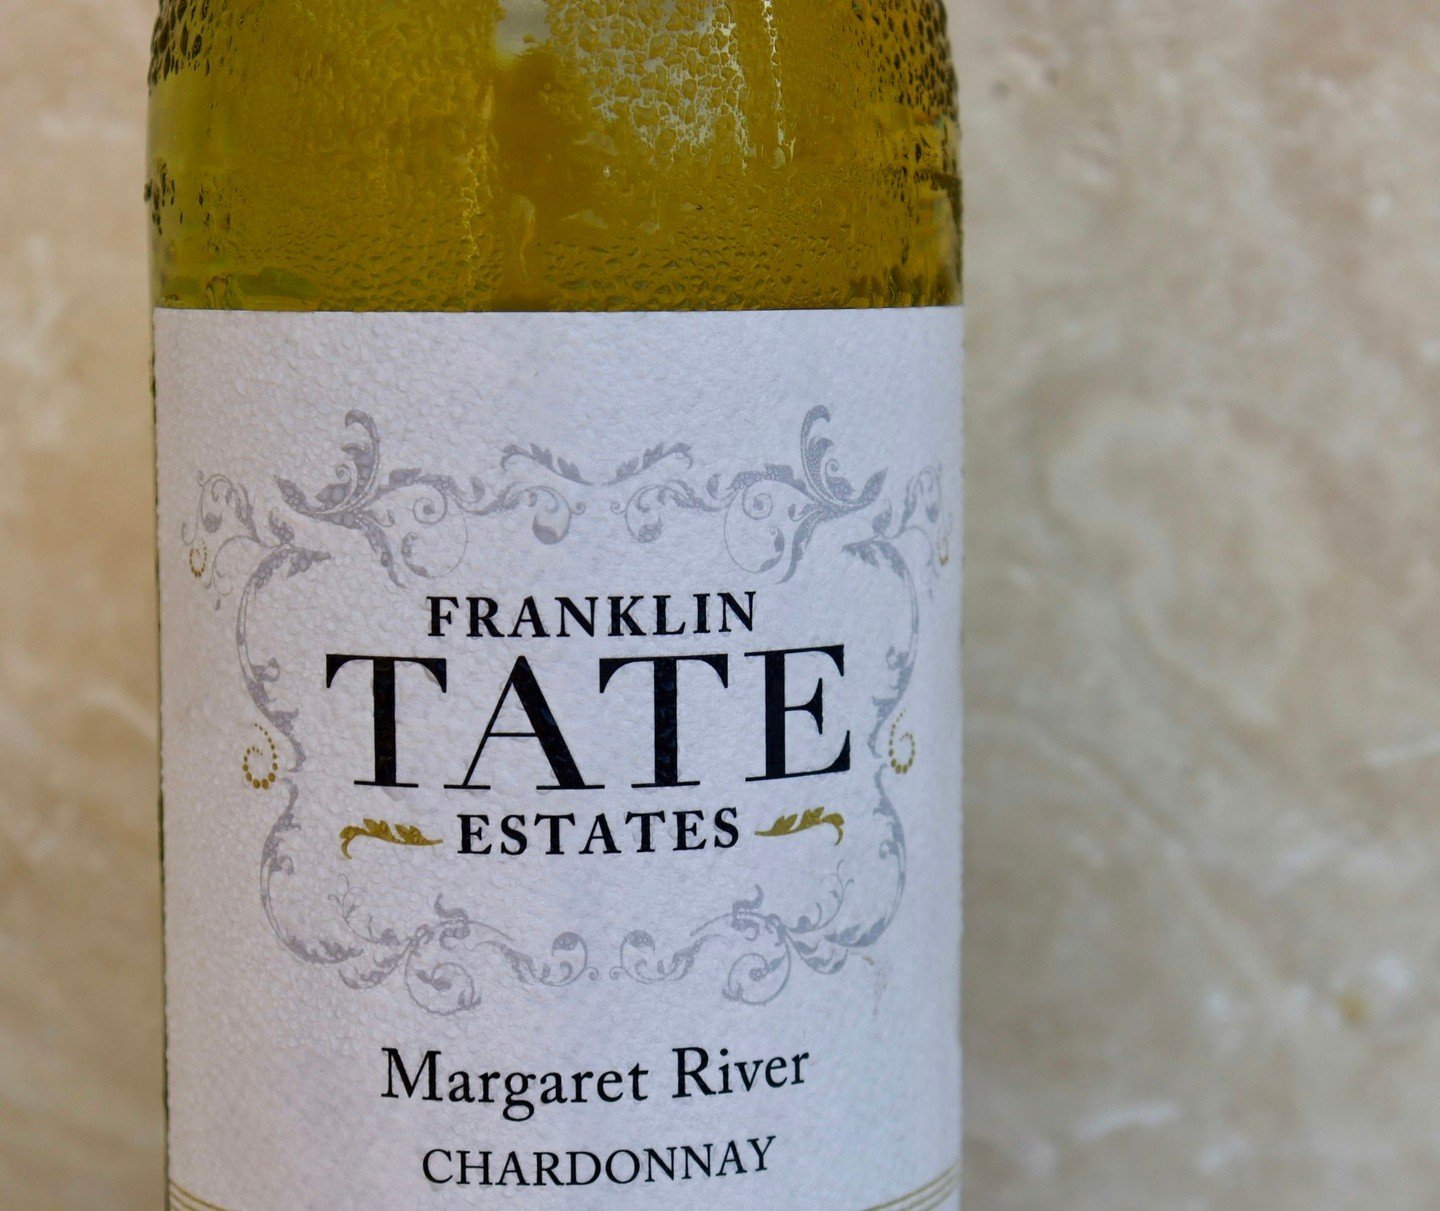 A classic Franklin Tate Estate Chardonnay from Margaret River - the renowned wine region in Western Australia known for producing elegant and complex white wines.